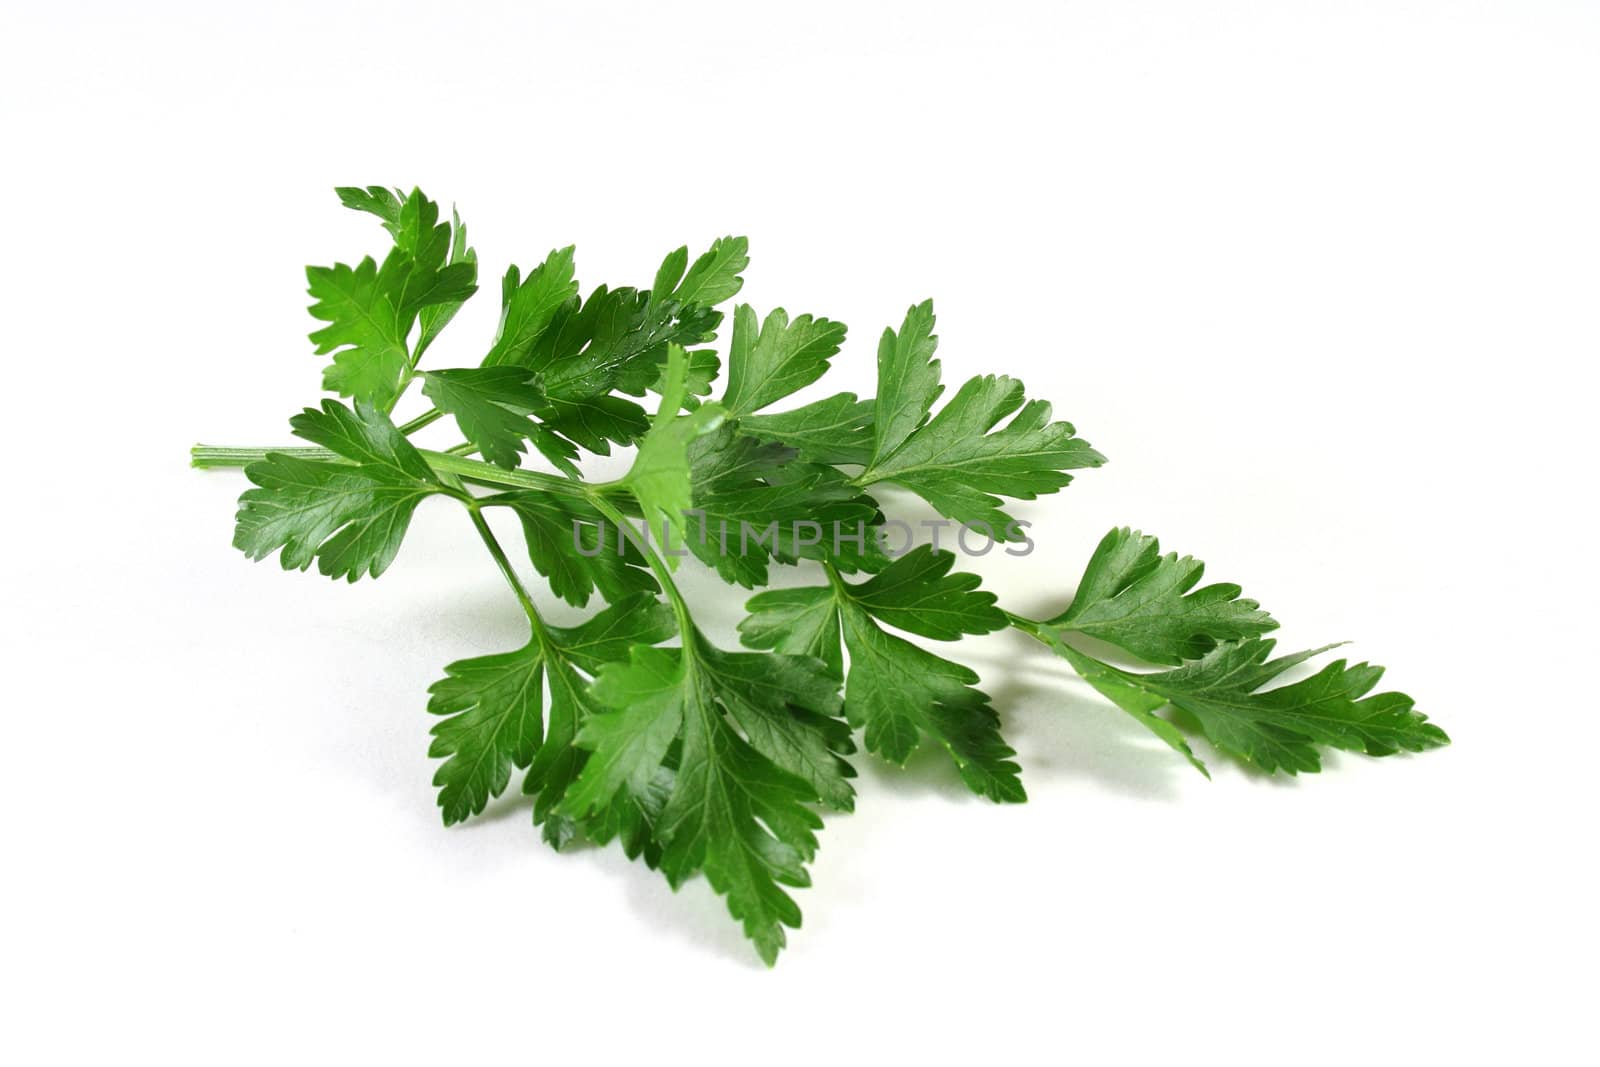 Lovage on a white background